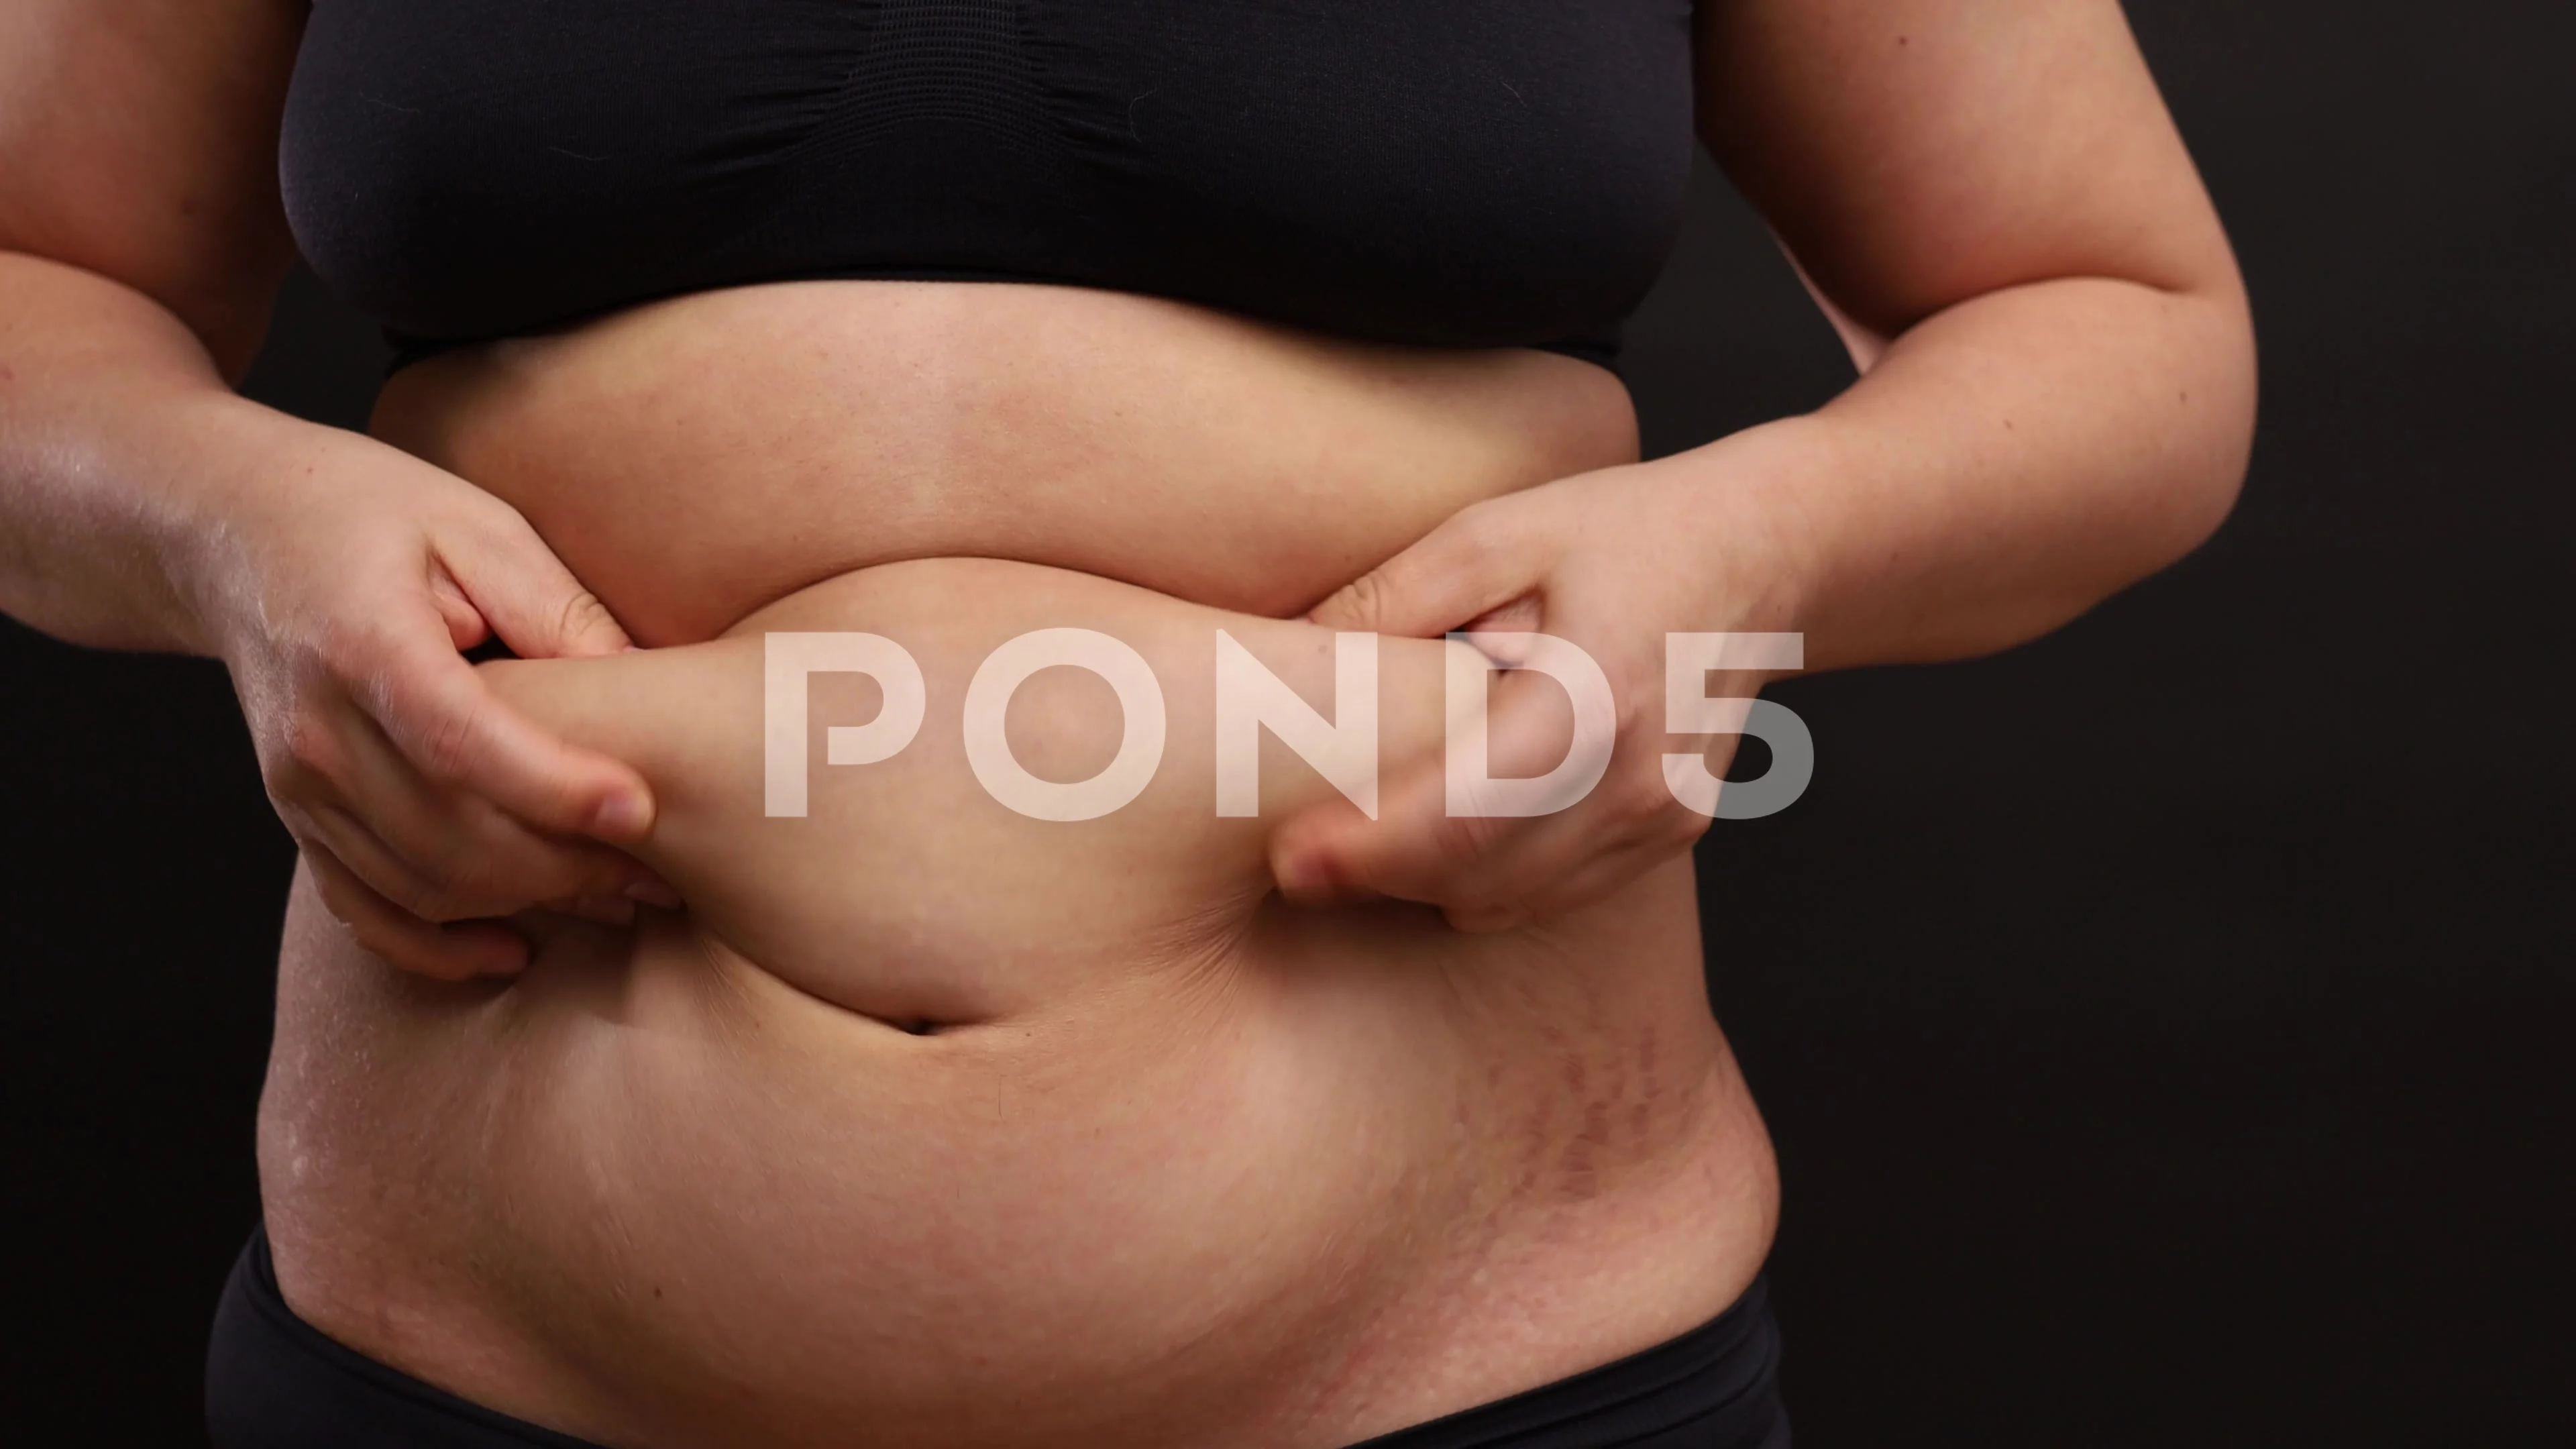 Unrecognizable black woman in underwear showing excessive fat on belly  Stock Photo by Prostock-studio